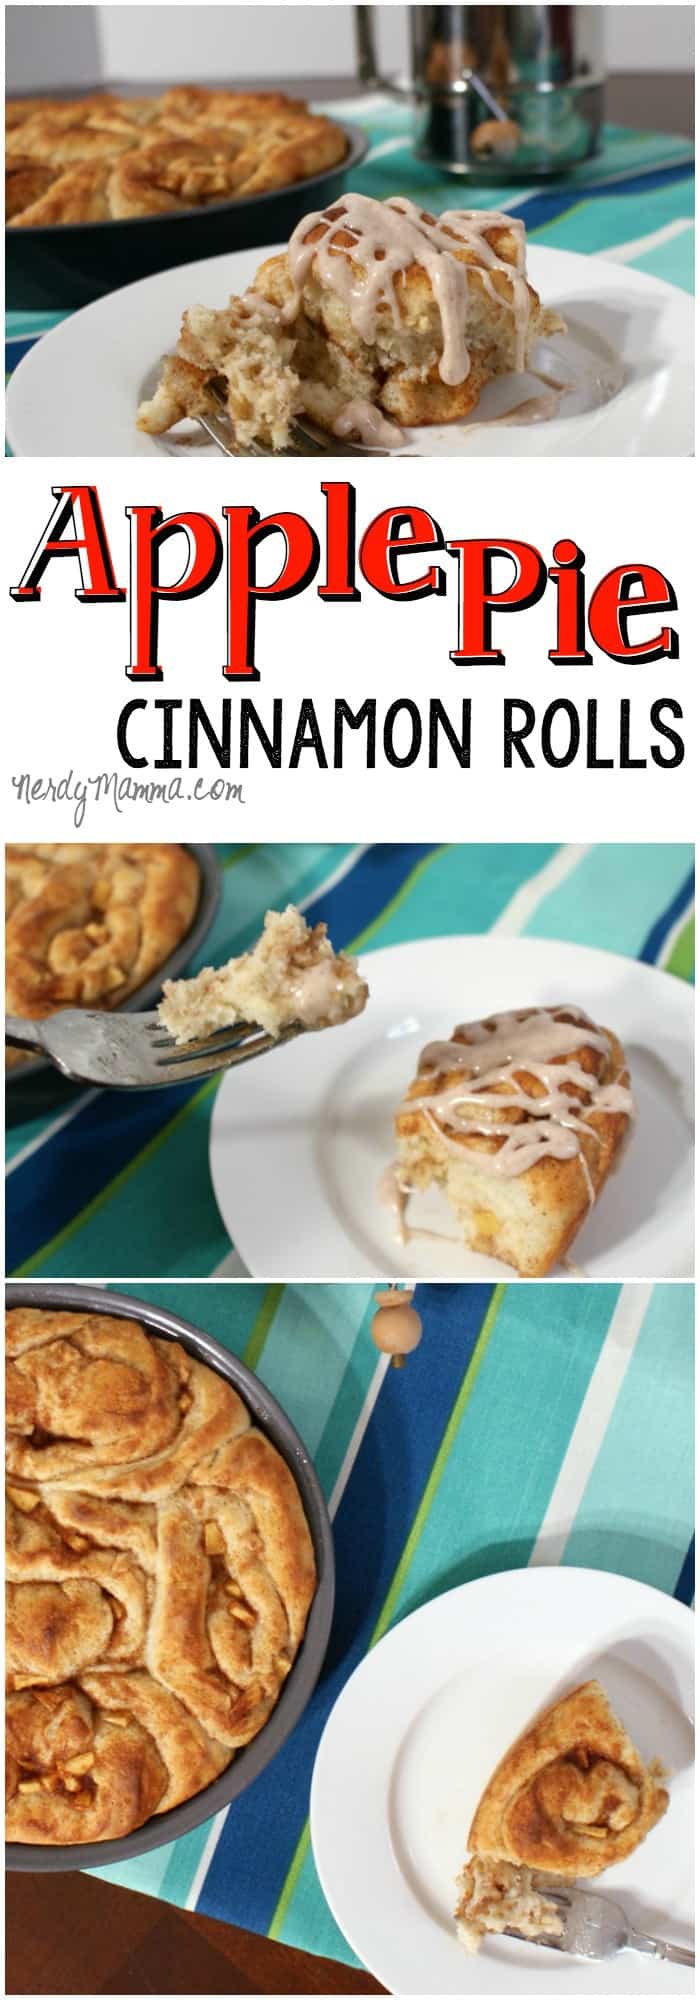 There are no words to describe how wonderful these egg-free and dairy-free Apple Pie Cinnamon Rolls are. They're the best dessert--oops, I mean Breakfast, ever. LOL!